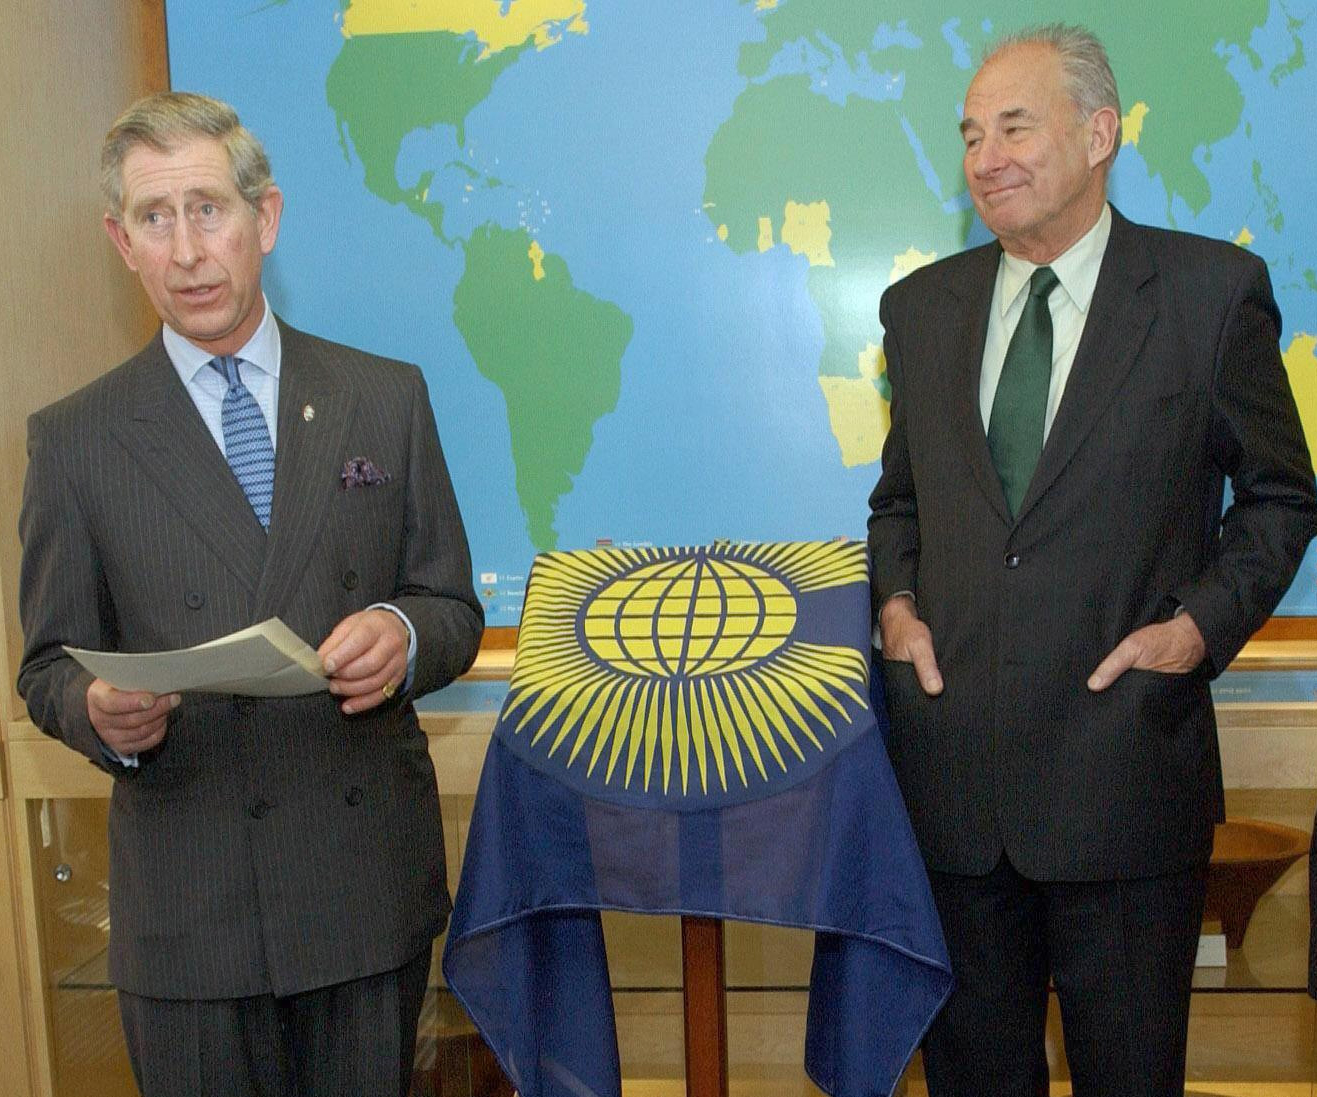 Don McKinnon labels Prince Charles frustrating to deal with in an explosive new book